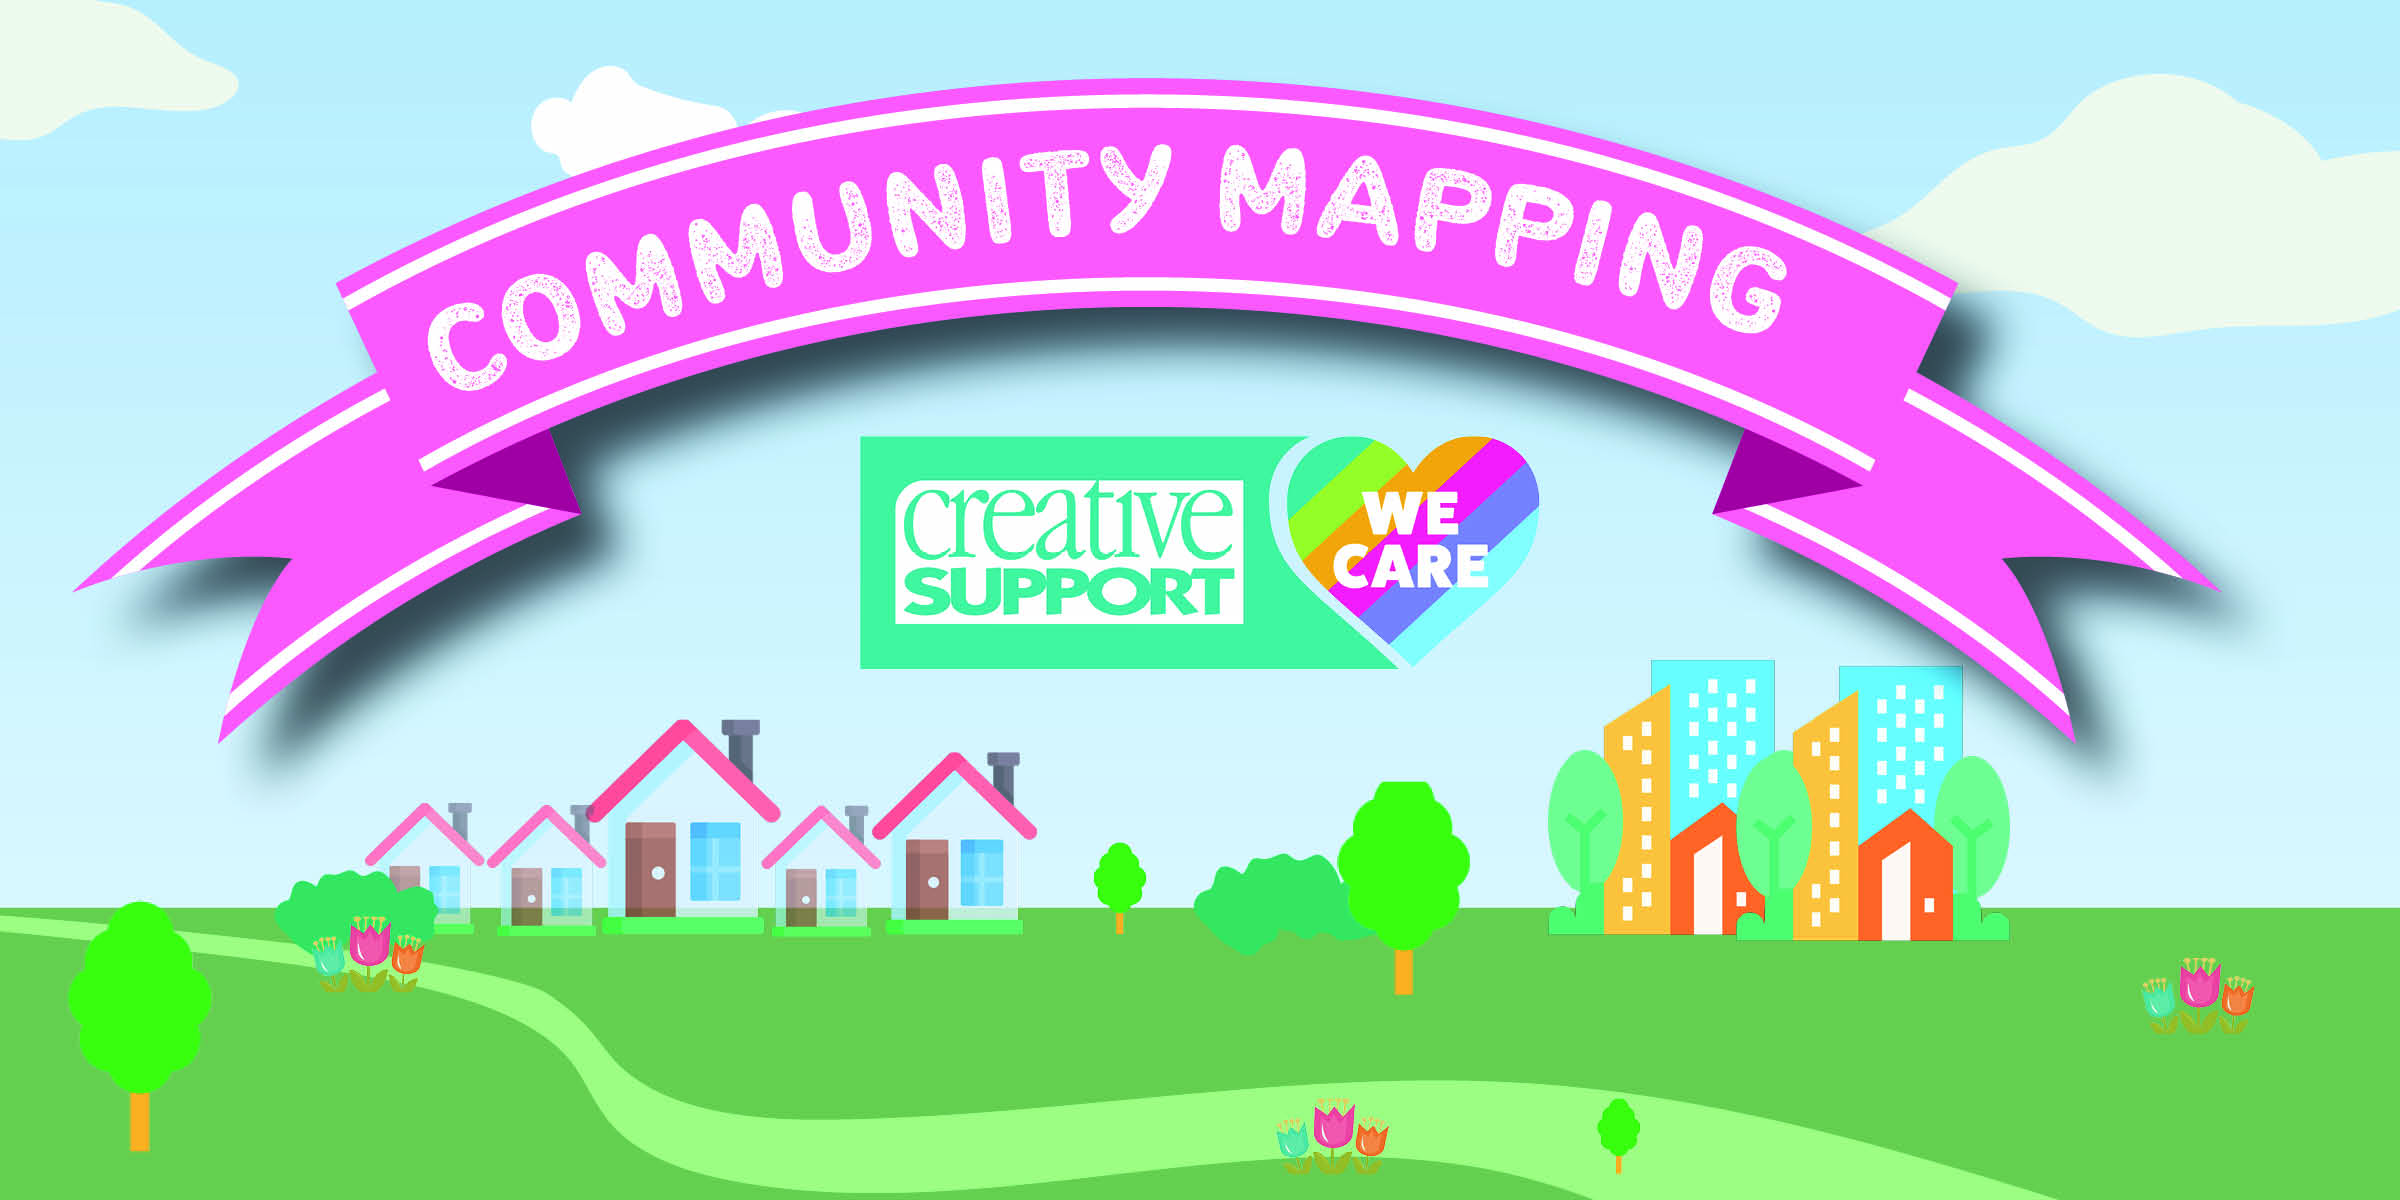 Open Access | Community Mapping